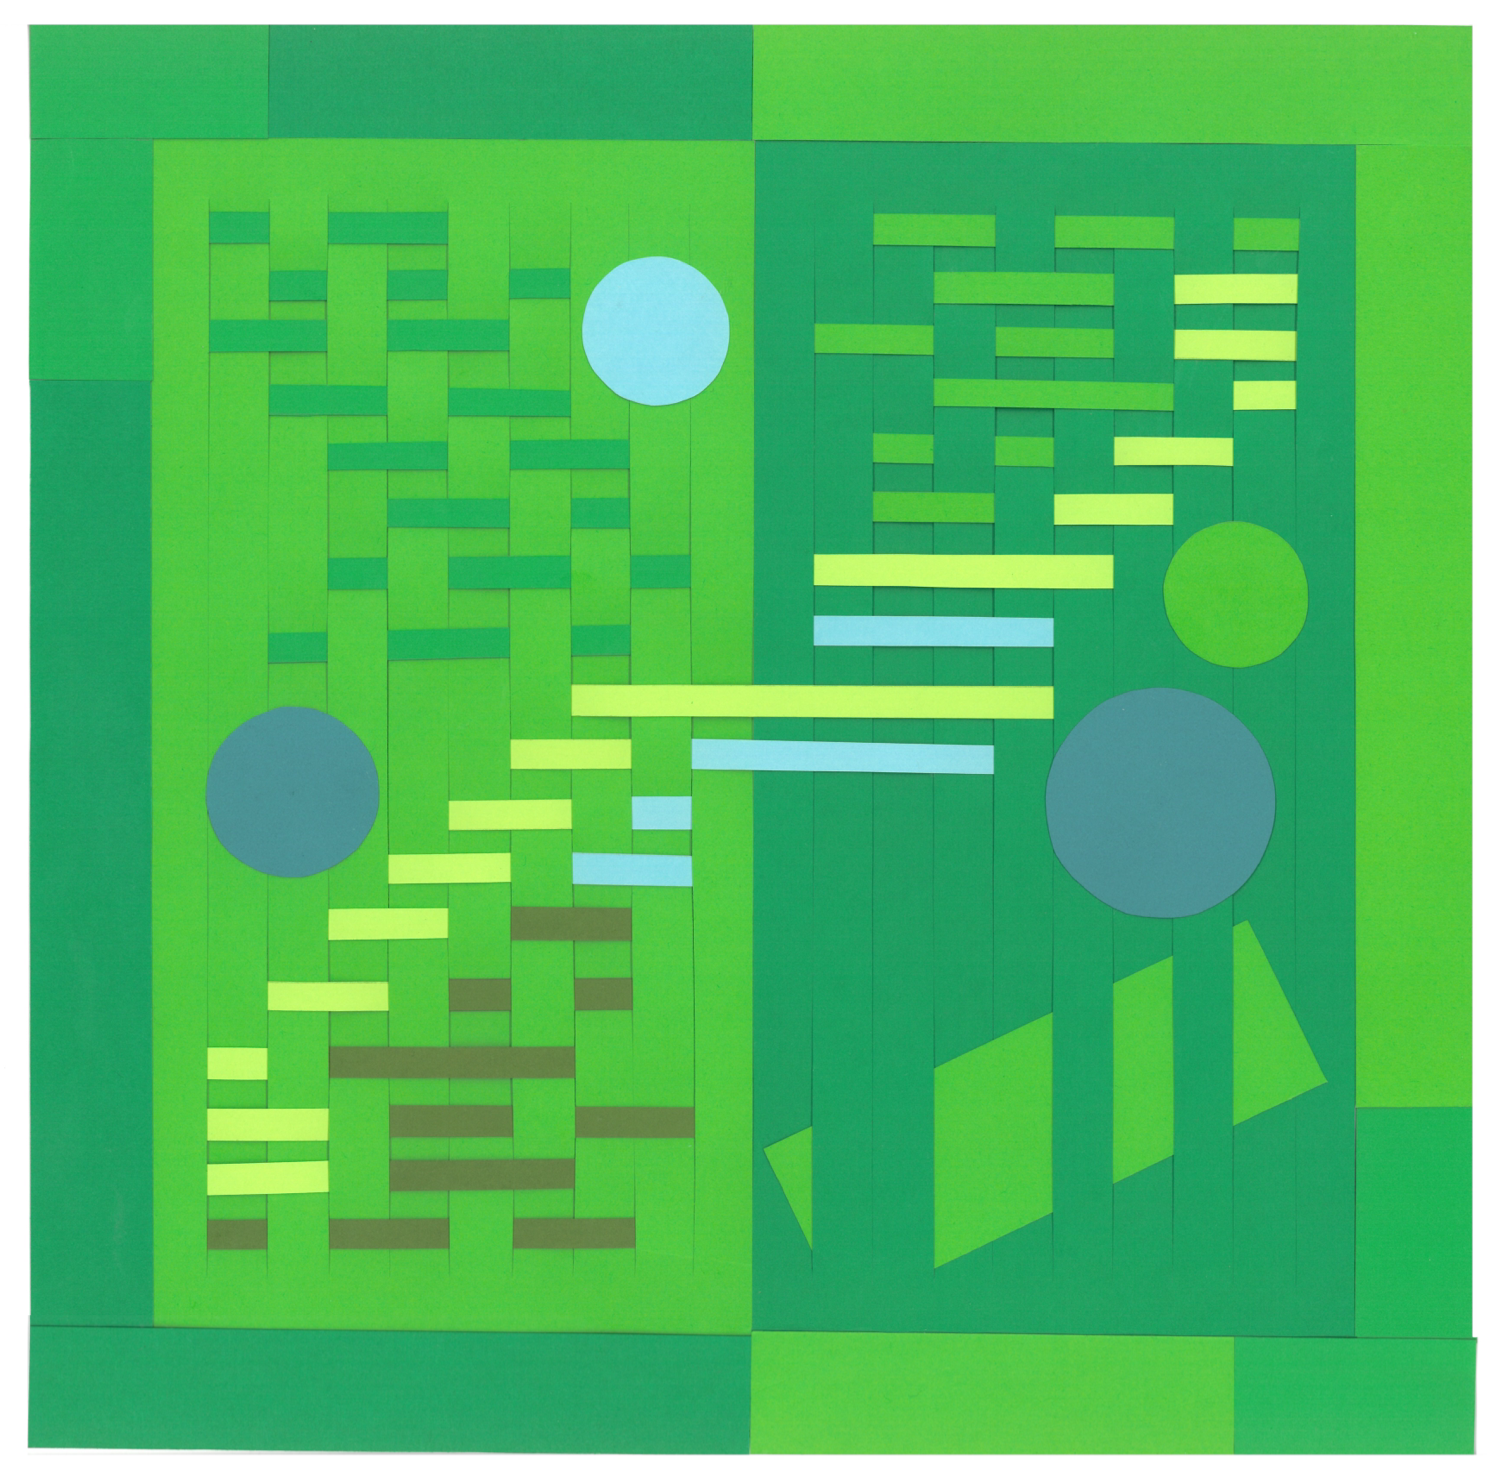 Image of woven paper. Left side has dark green border, light green vertical strips, and varying shades of dark and light green and blue as horizontal stripes and circles. Right side colors are somewhat inverted from left side, with a larger diagonal green strip.